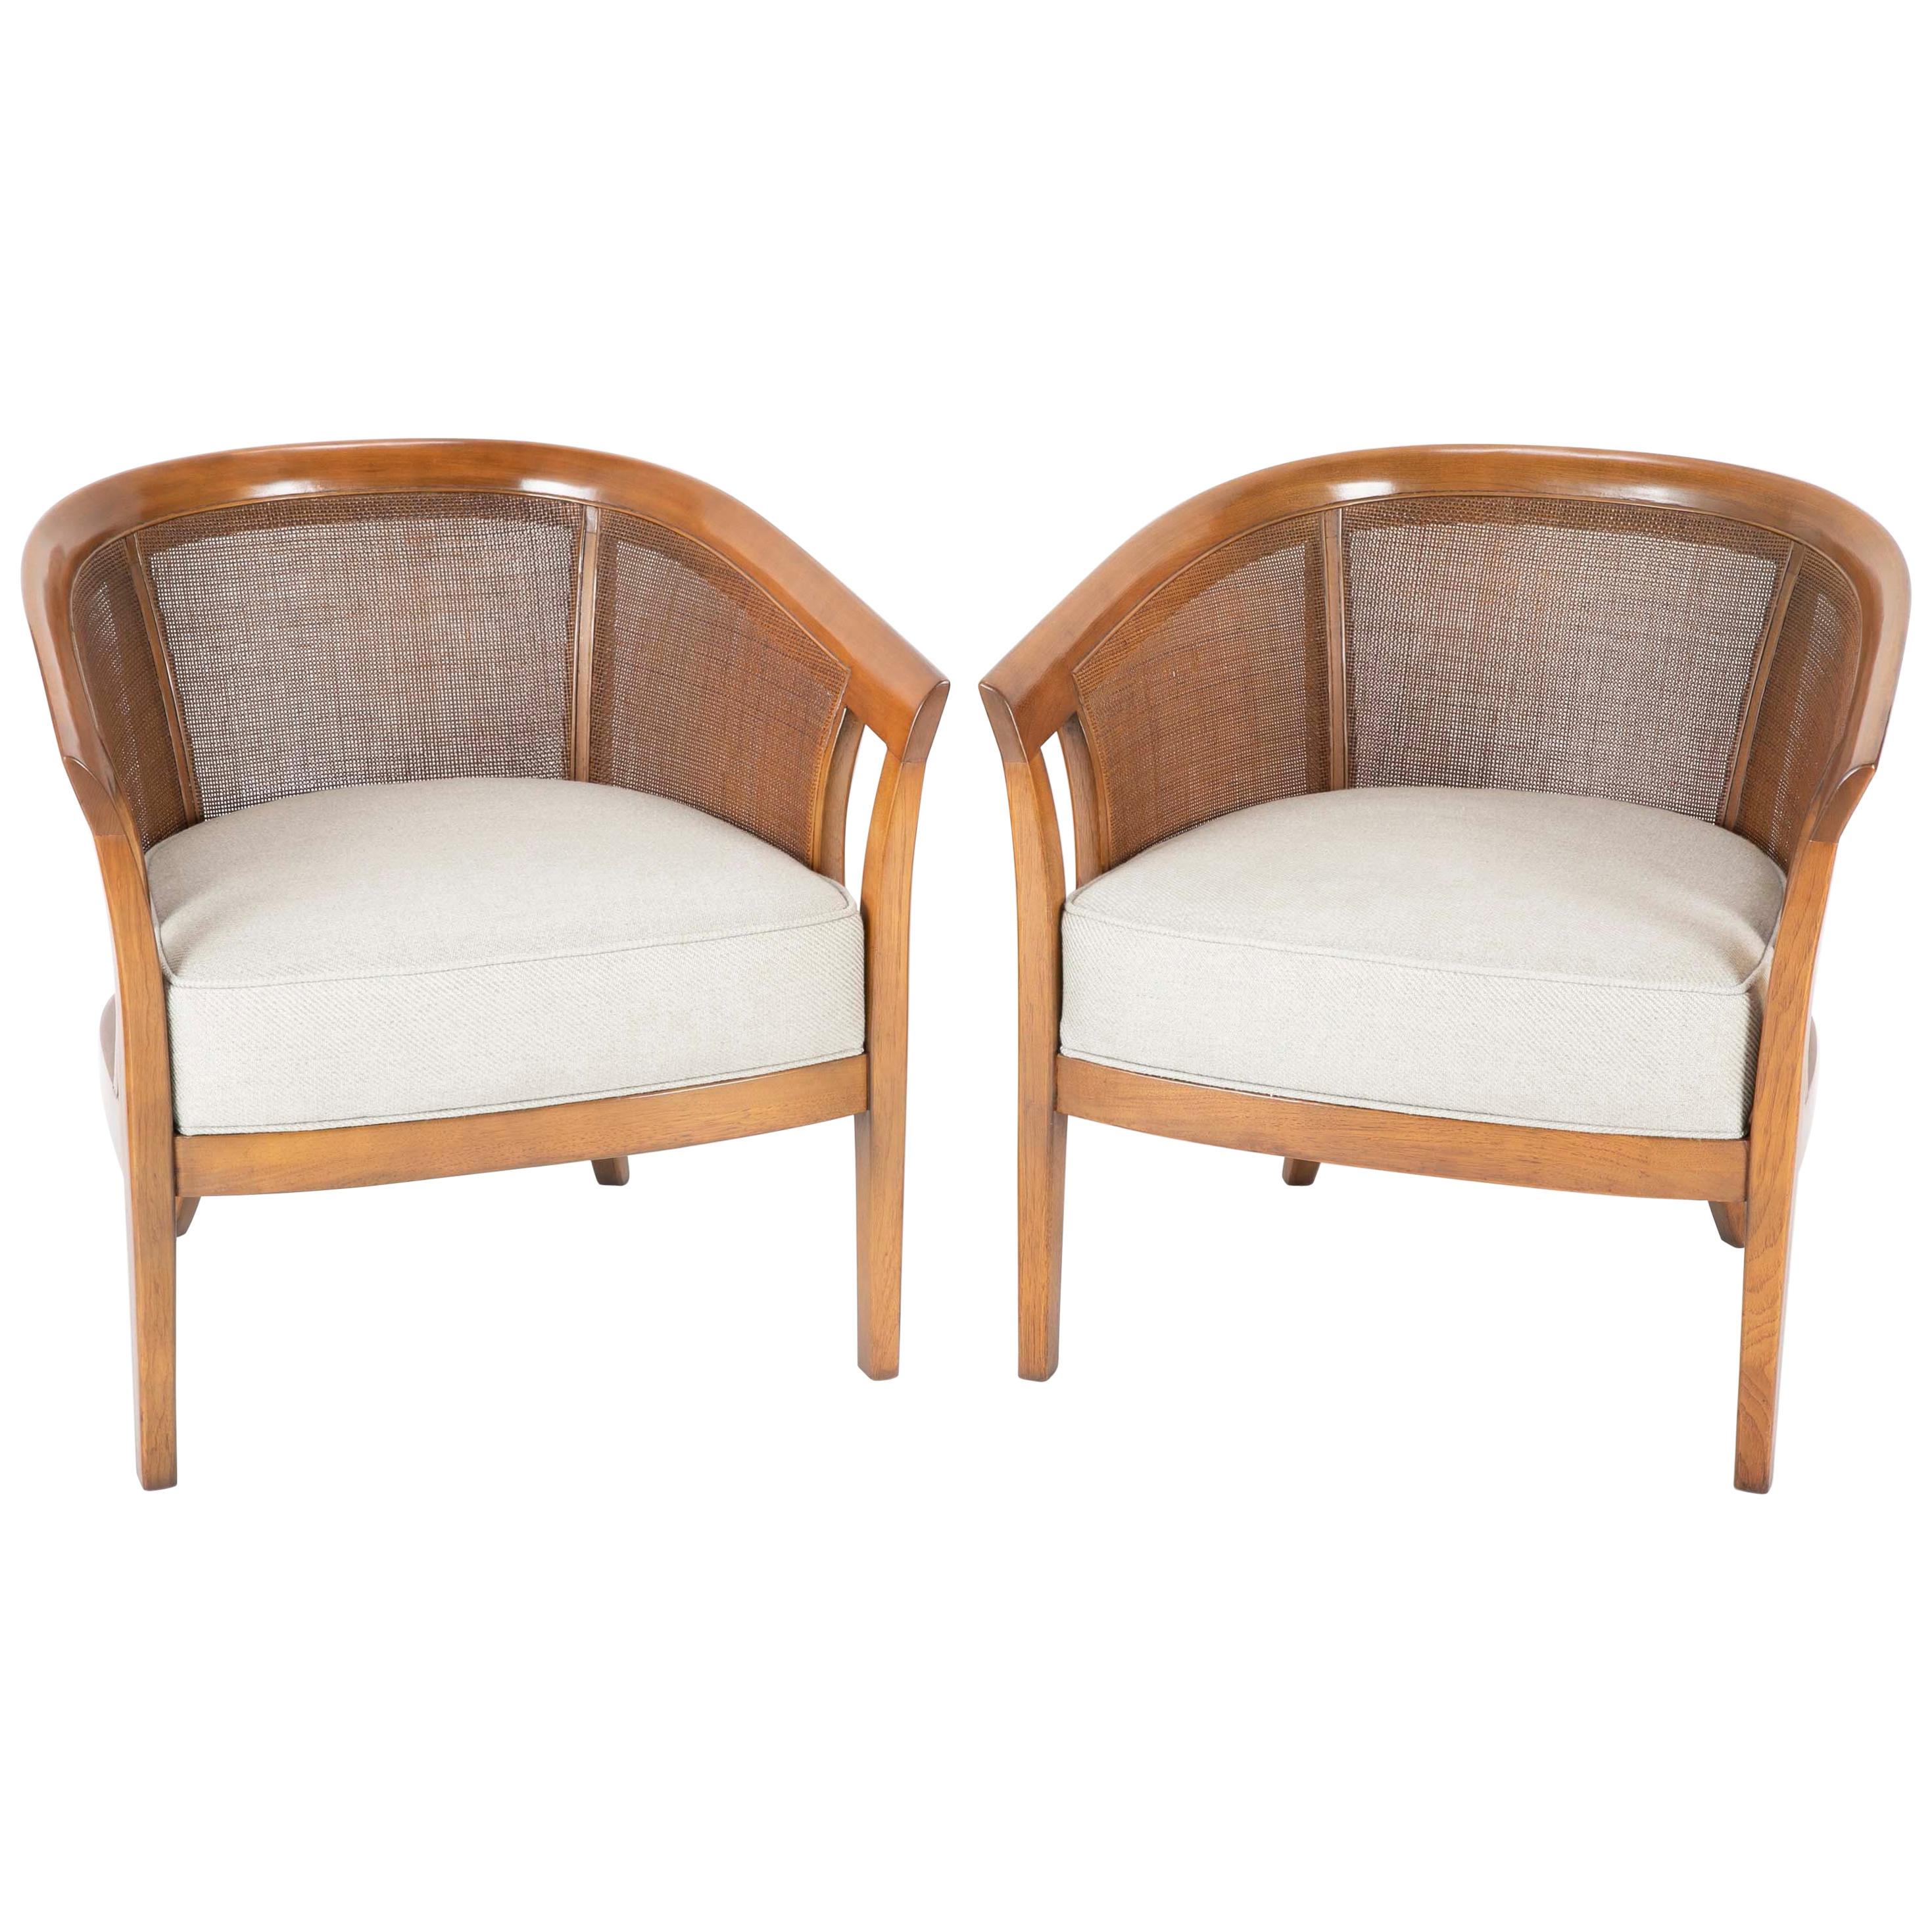 Pair of Caned Tub Back Armchairs Designed by Edward Wormley for Dunbar